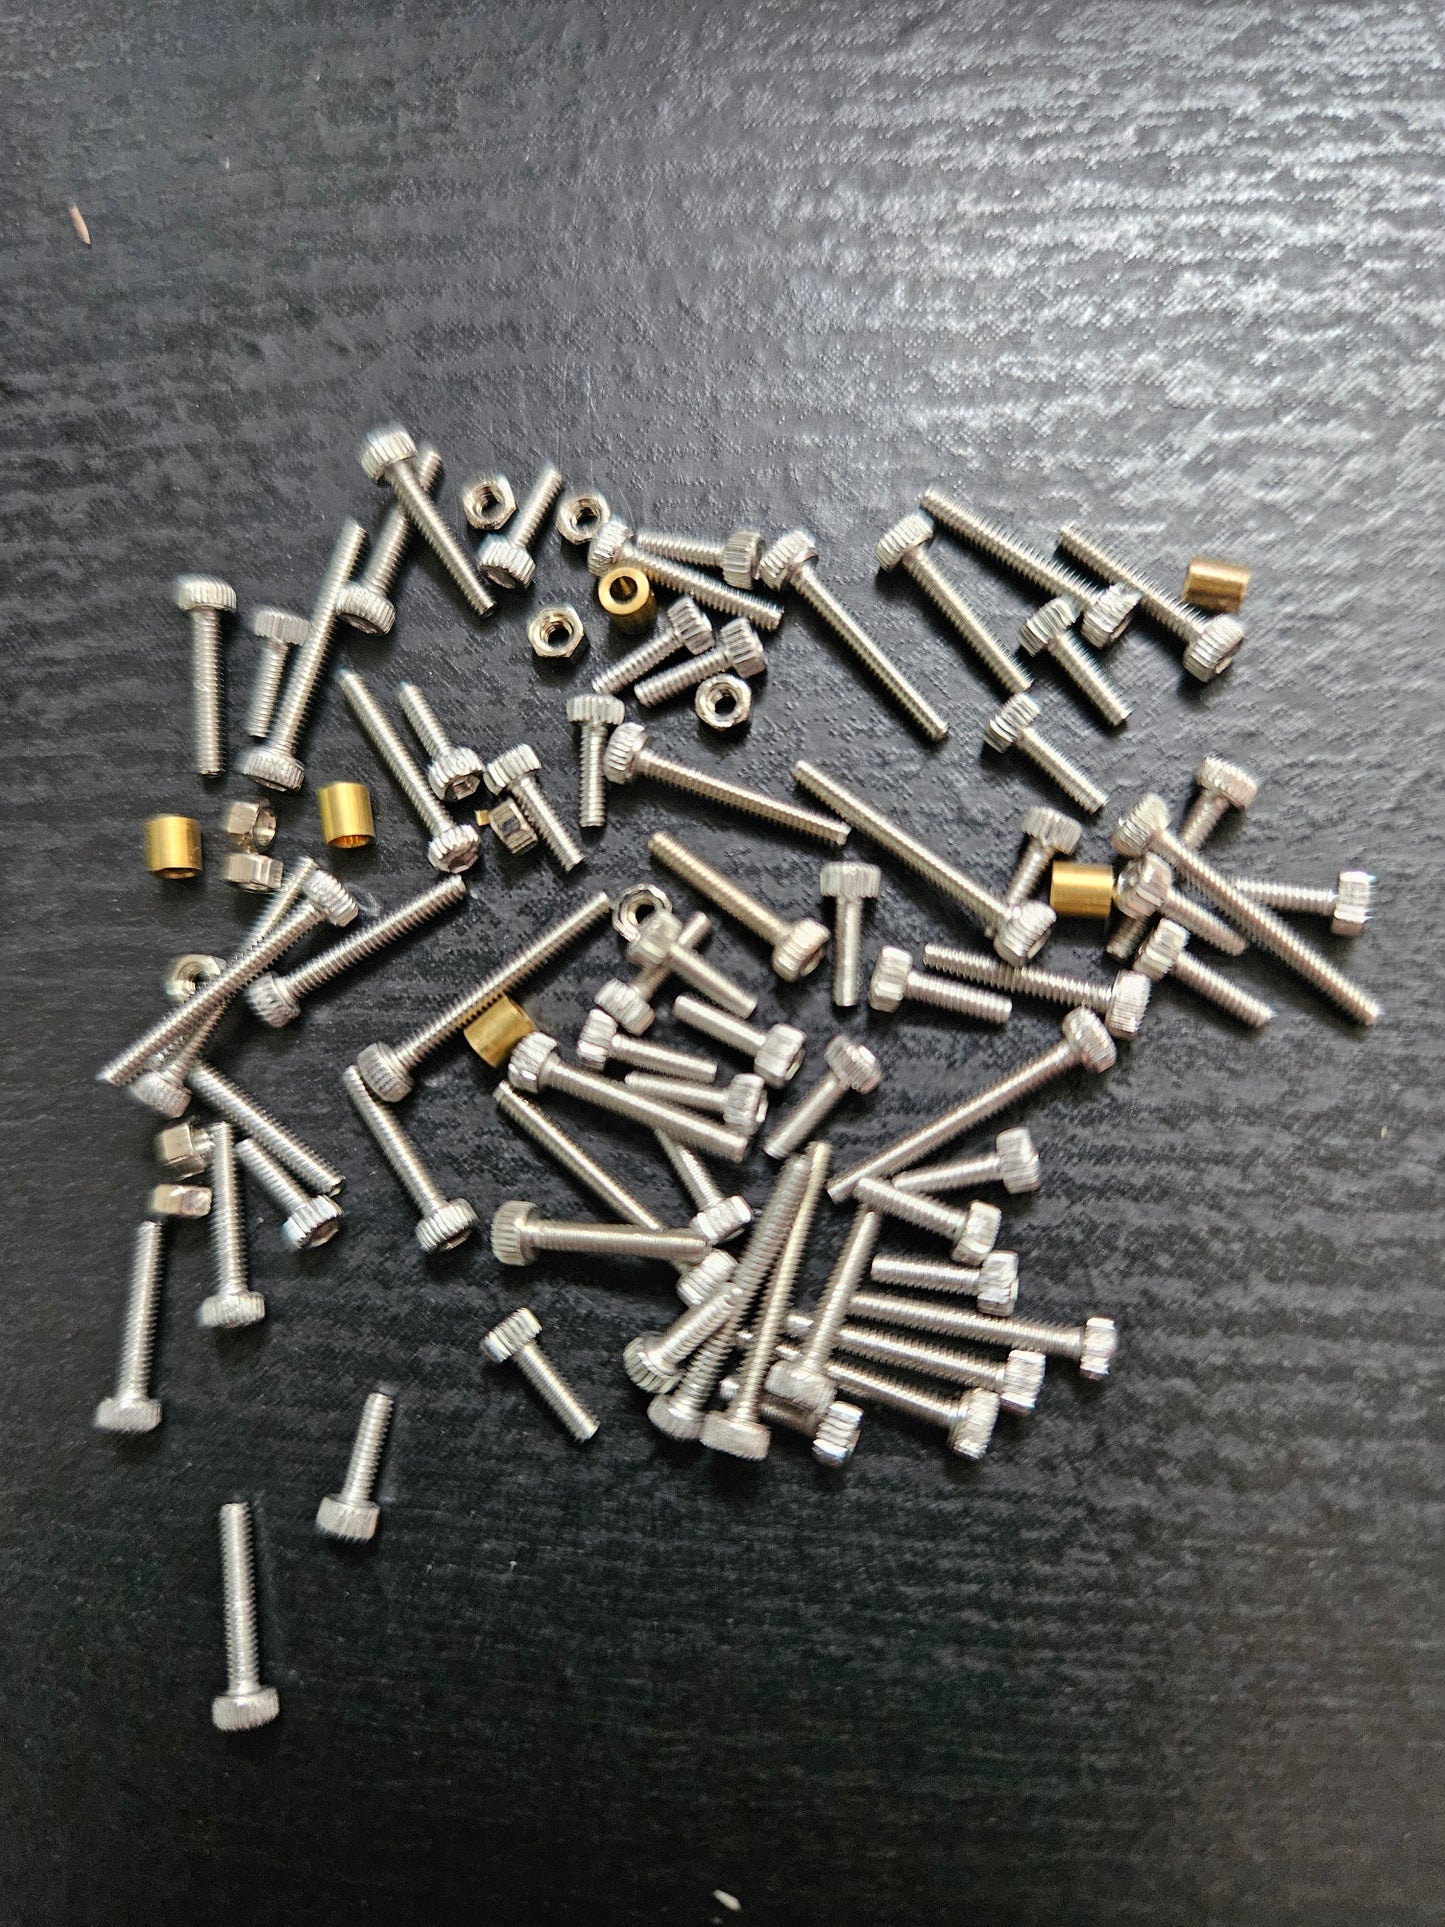 1.4mm Chassis Screw Kit w/ knuckle bushings